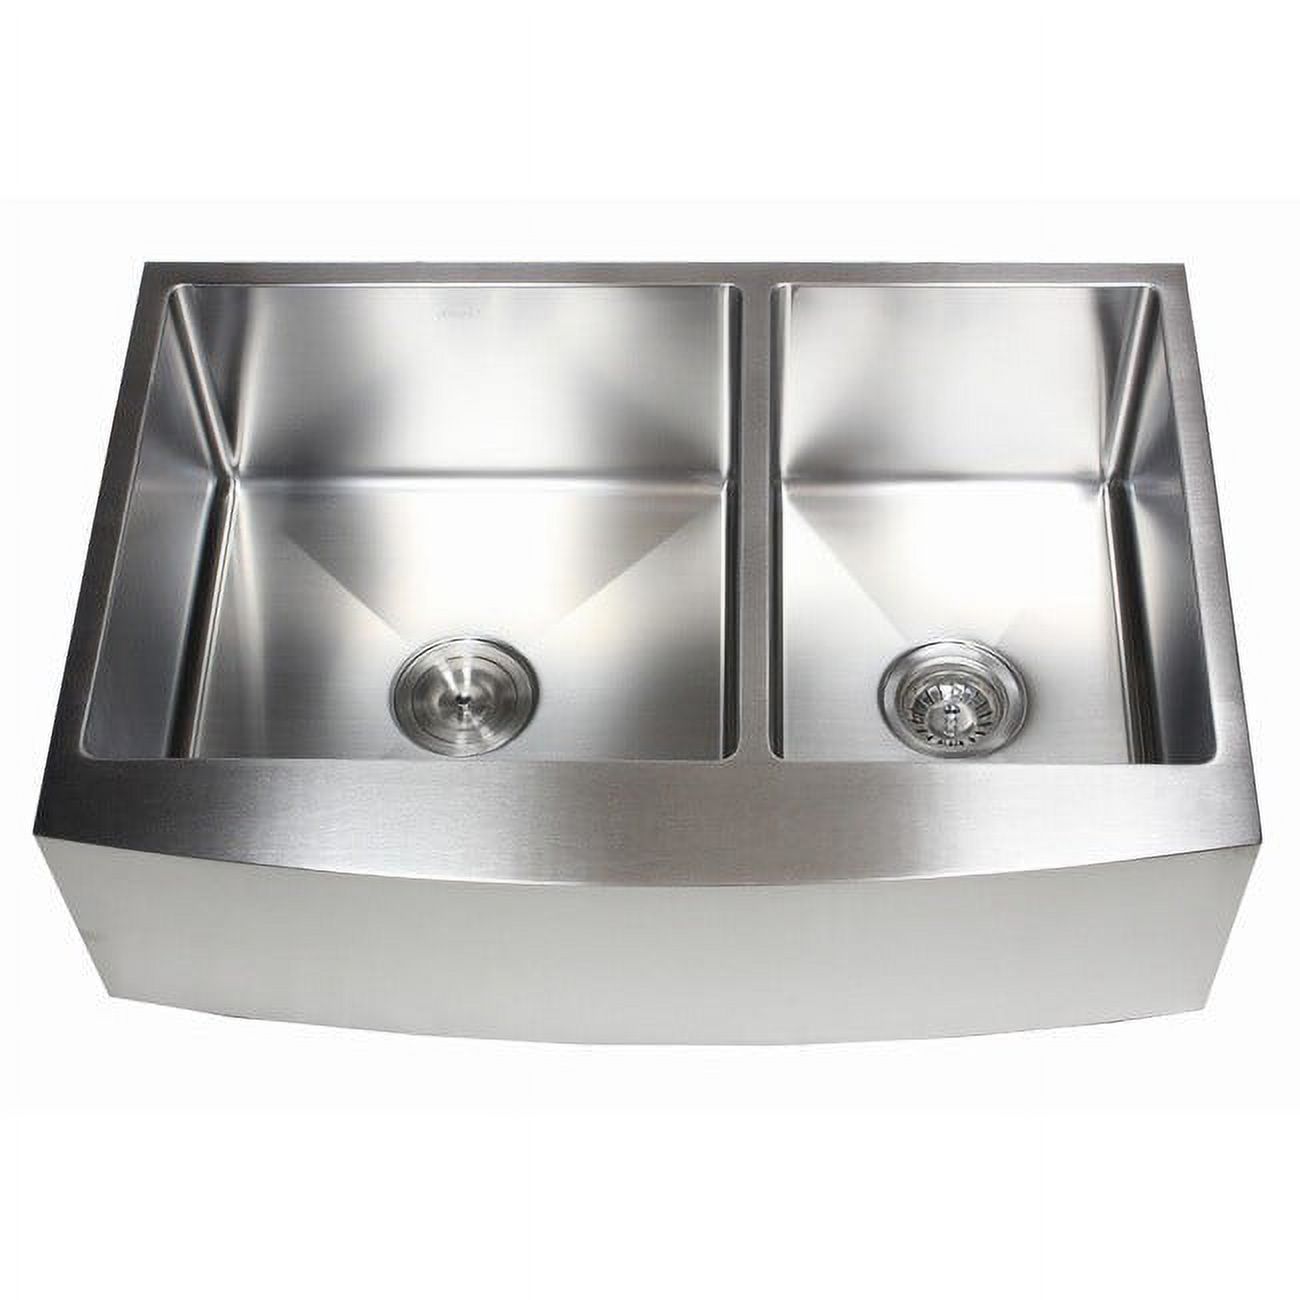 Contempo Living Inc 36-inch 15mm Curved Front Farm Apron 60/40 Double Bowl Kitchen Sink - image 2 of 5